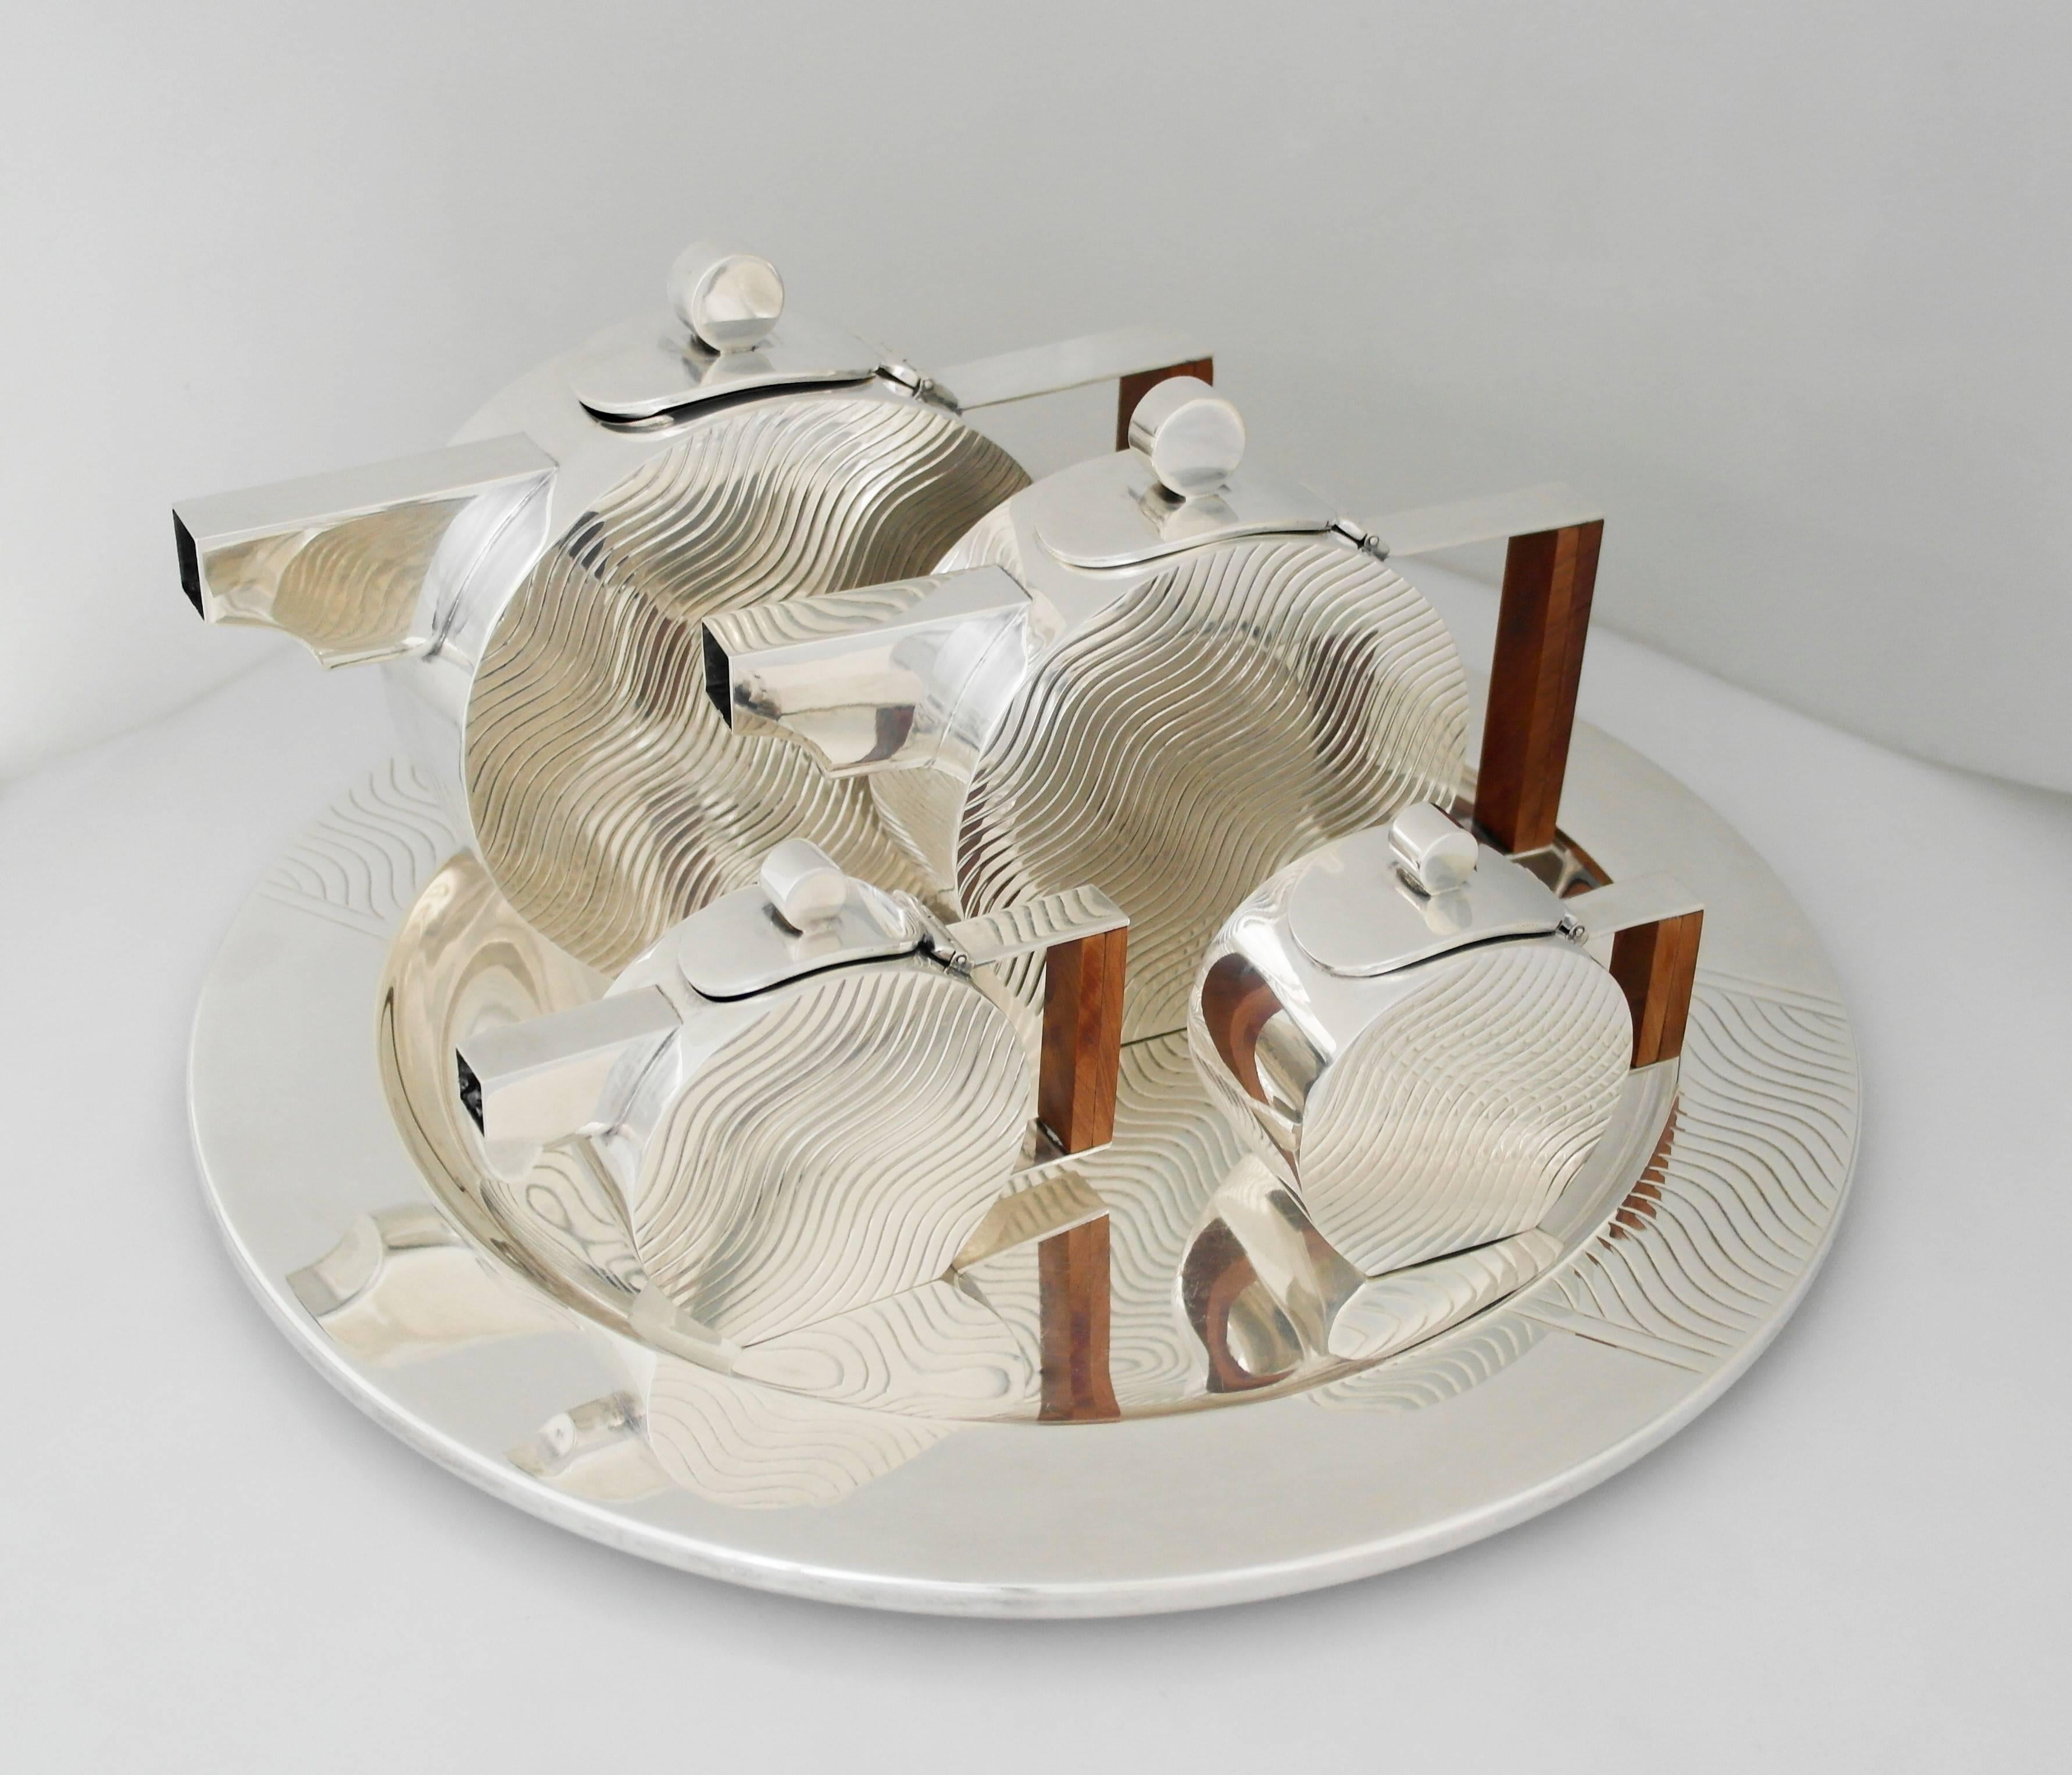 Italian Incredible Art Deco Inspired Sterling Silver Coffee and Tea Service With Tray